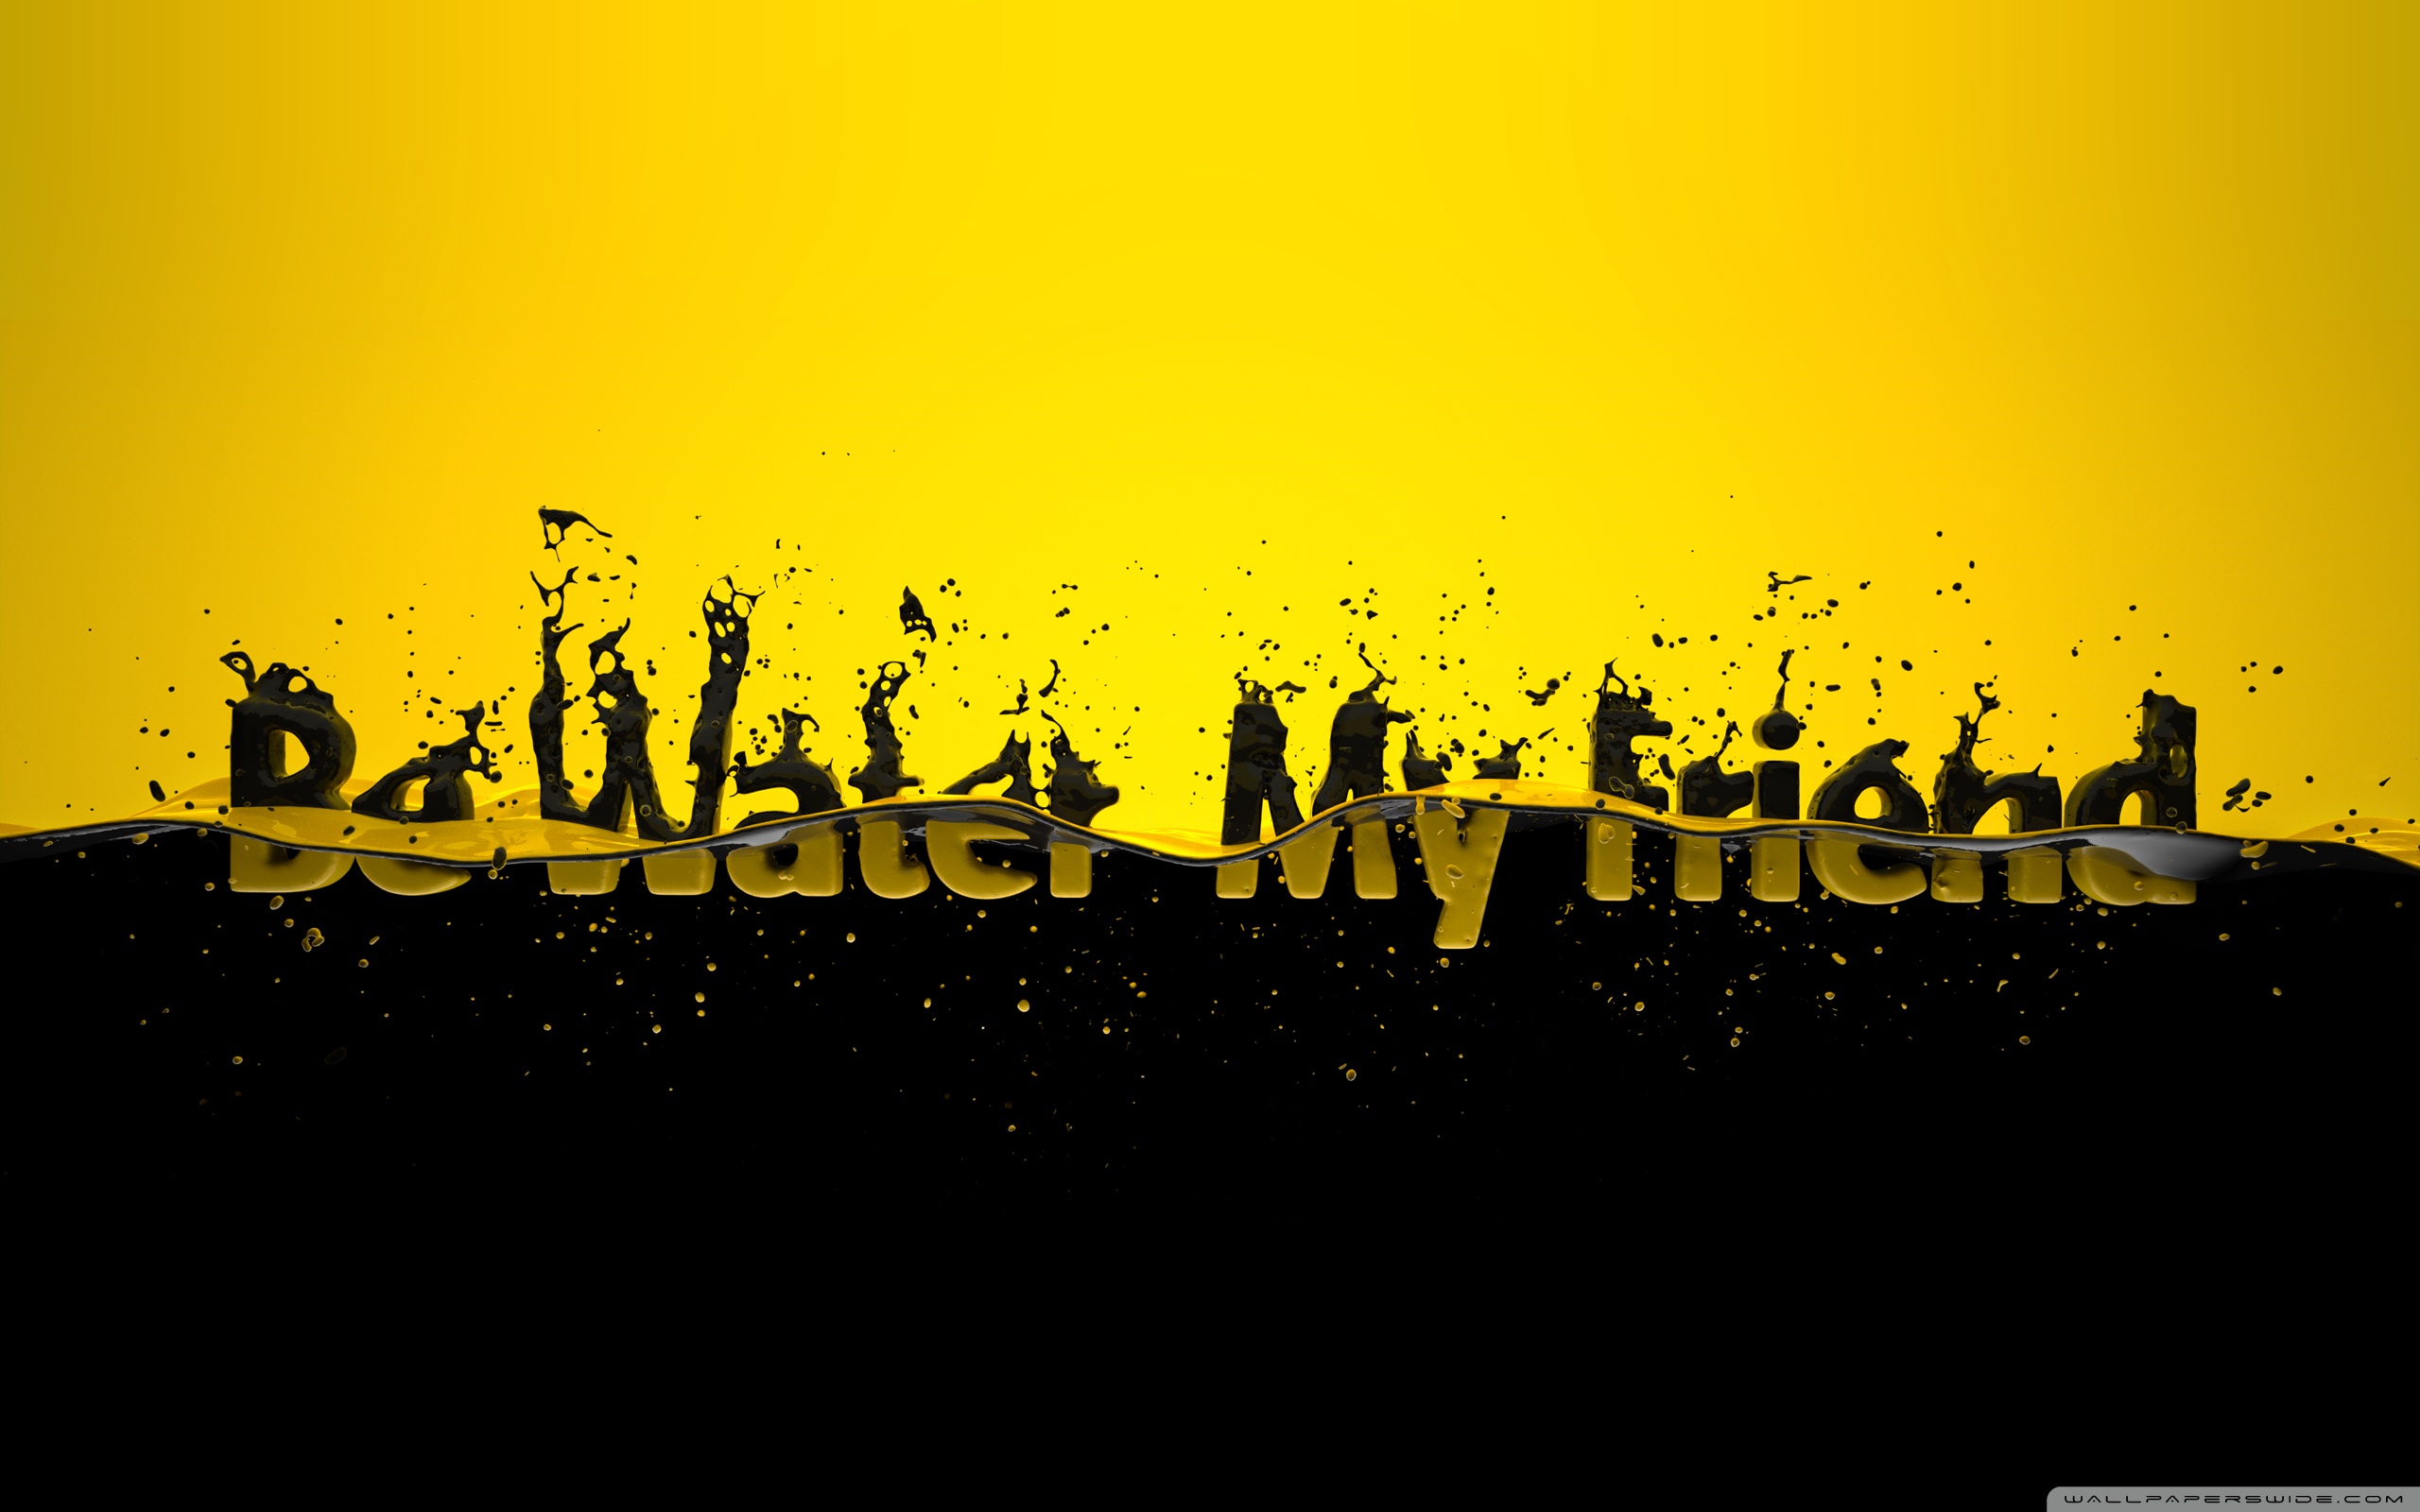 Free download Black And Yellow 4K HD Desktop Wallpaper for 4K Ultra HD TV [2560x1600] for your